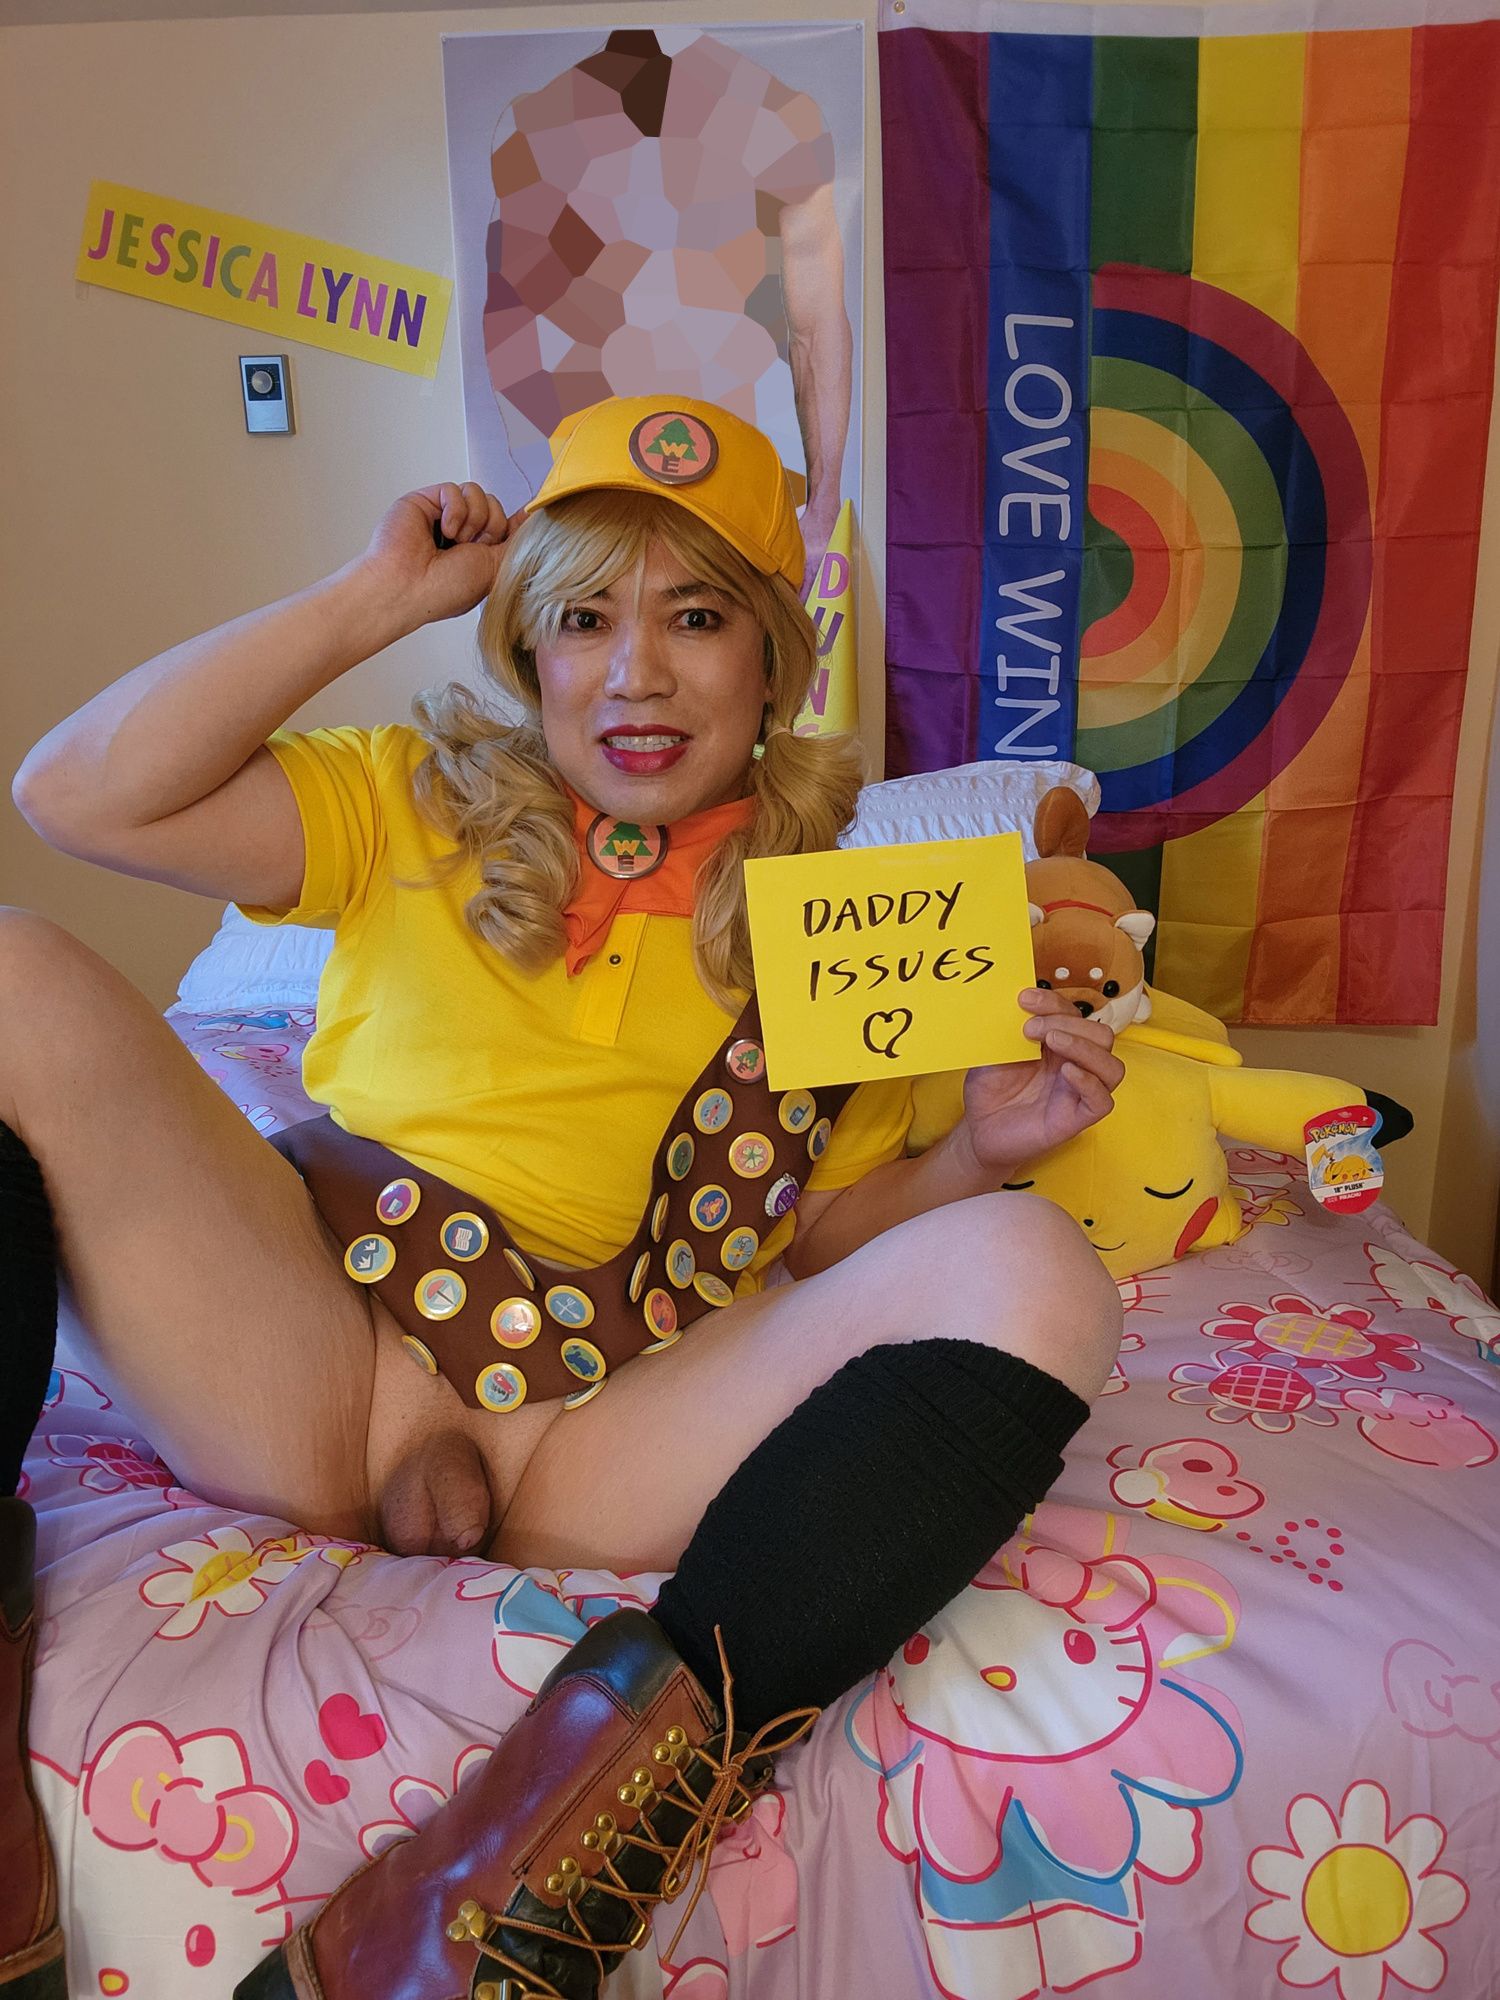 Daddy Issues Sissy Cosplay #19